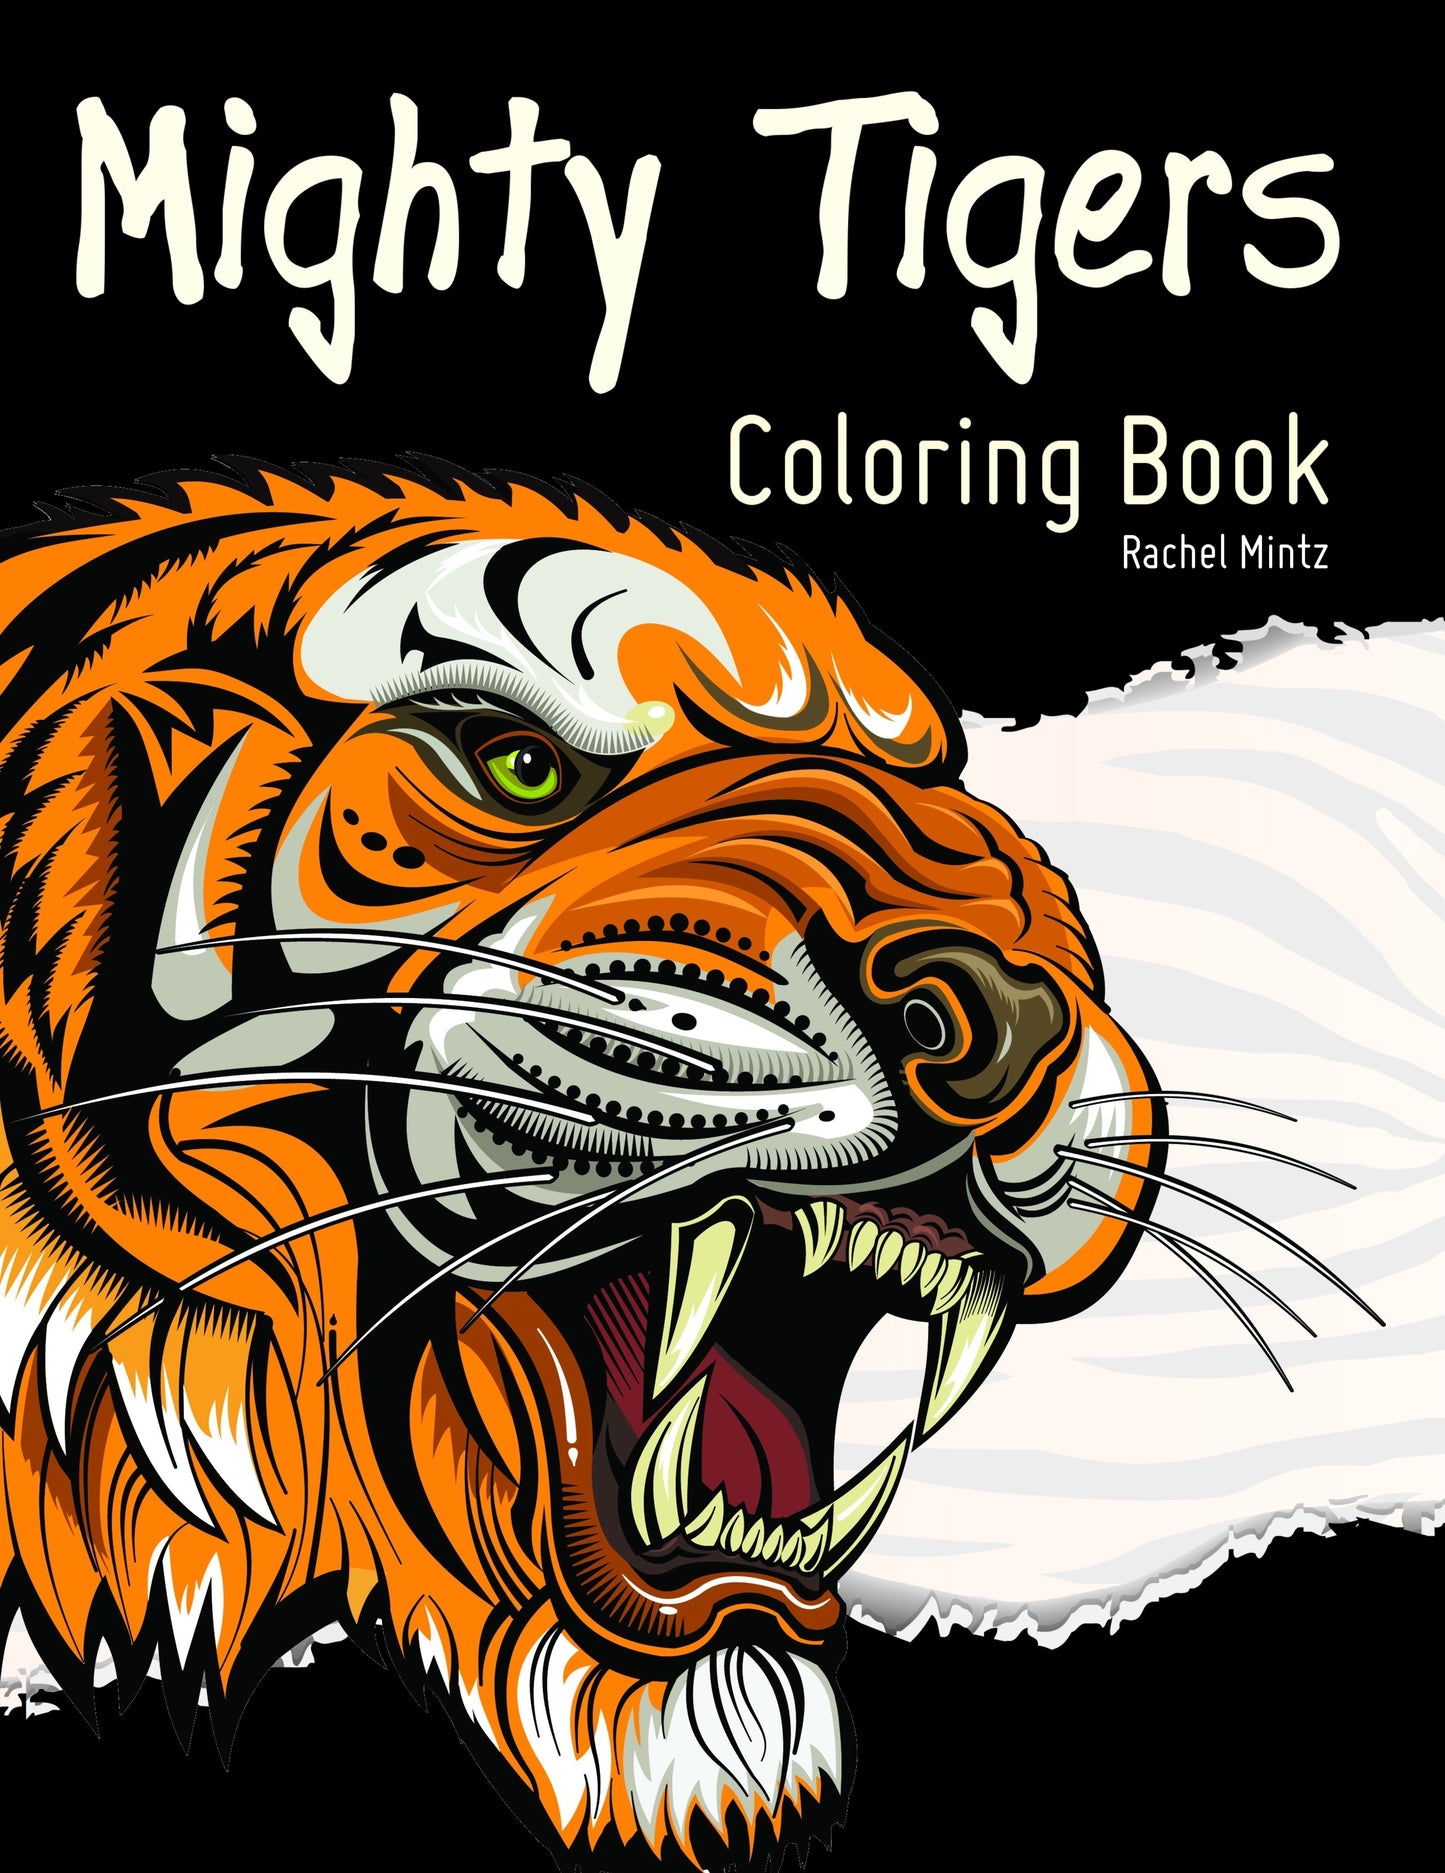 Mighty Tigers Coloring Book With 30 Pages of Leaping, Roaring Tigers - Rachel Mintz